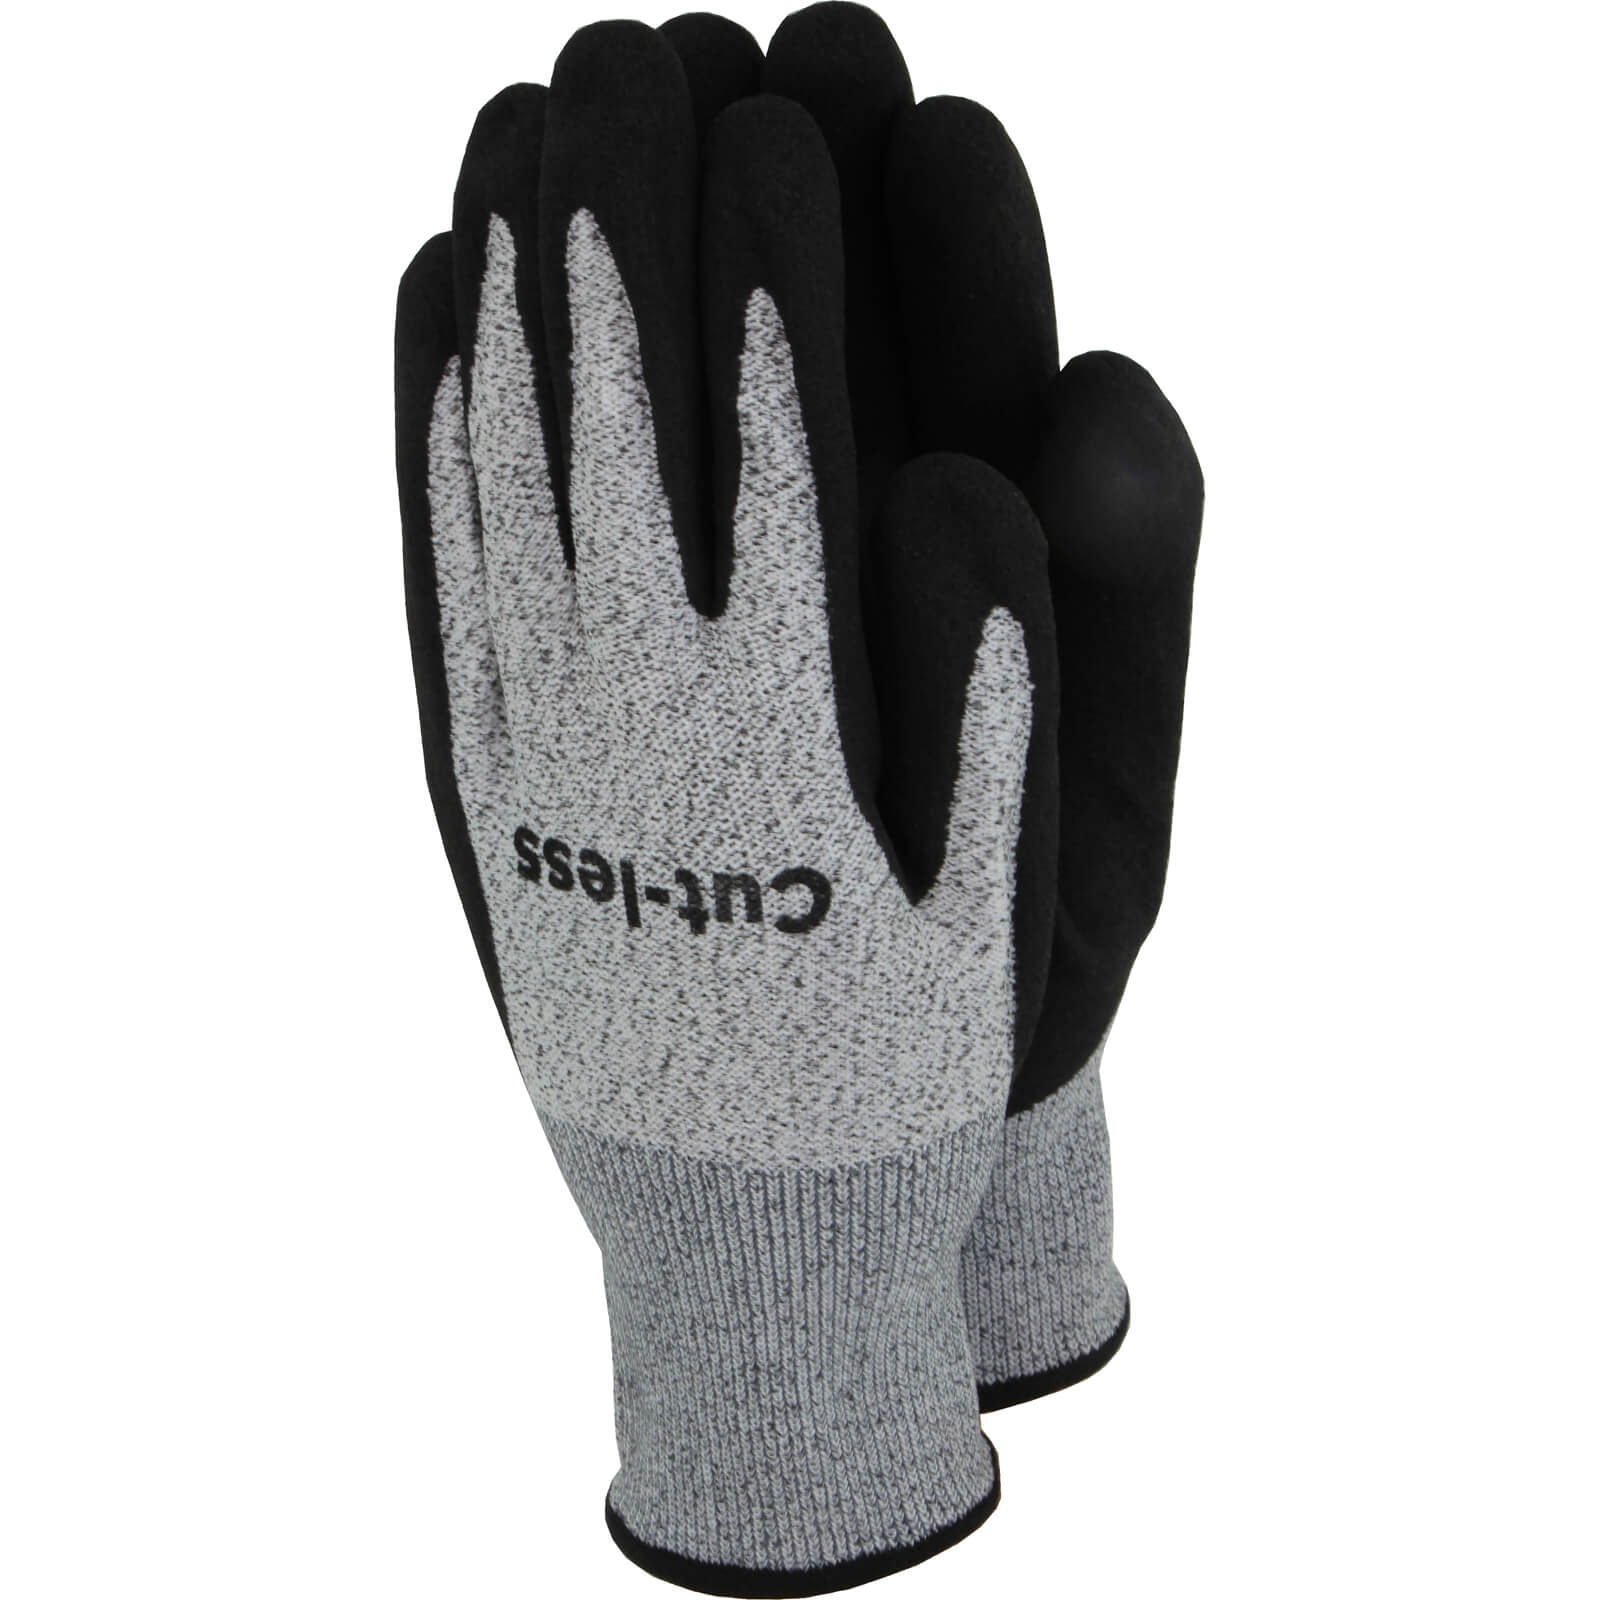 Image of Town and Country Cut Less Gloves Black / Grey L